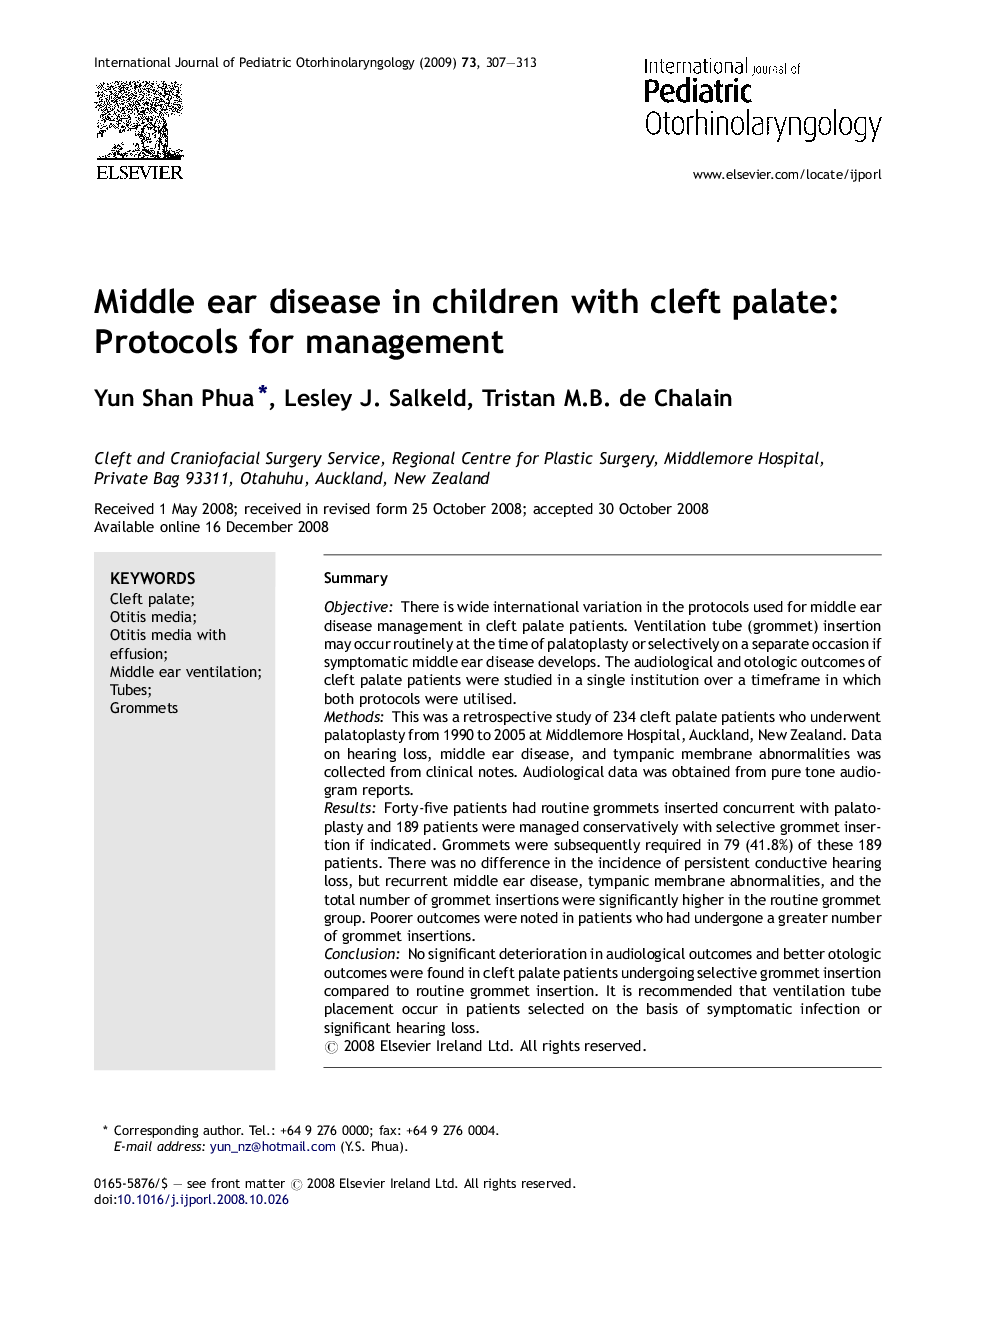 Middle ear disease in children with cleft palate: Protocols for management